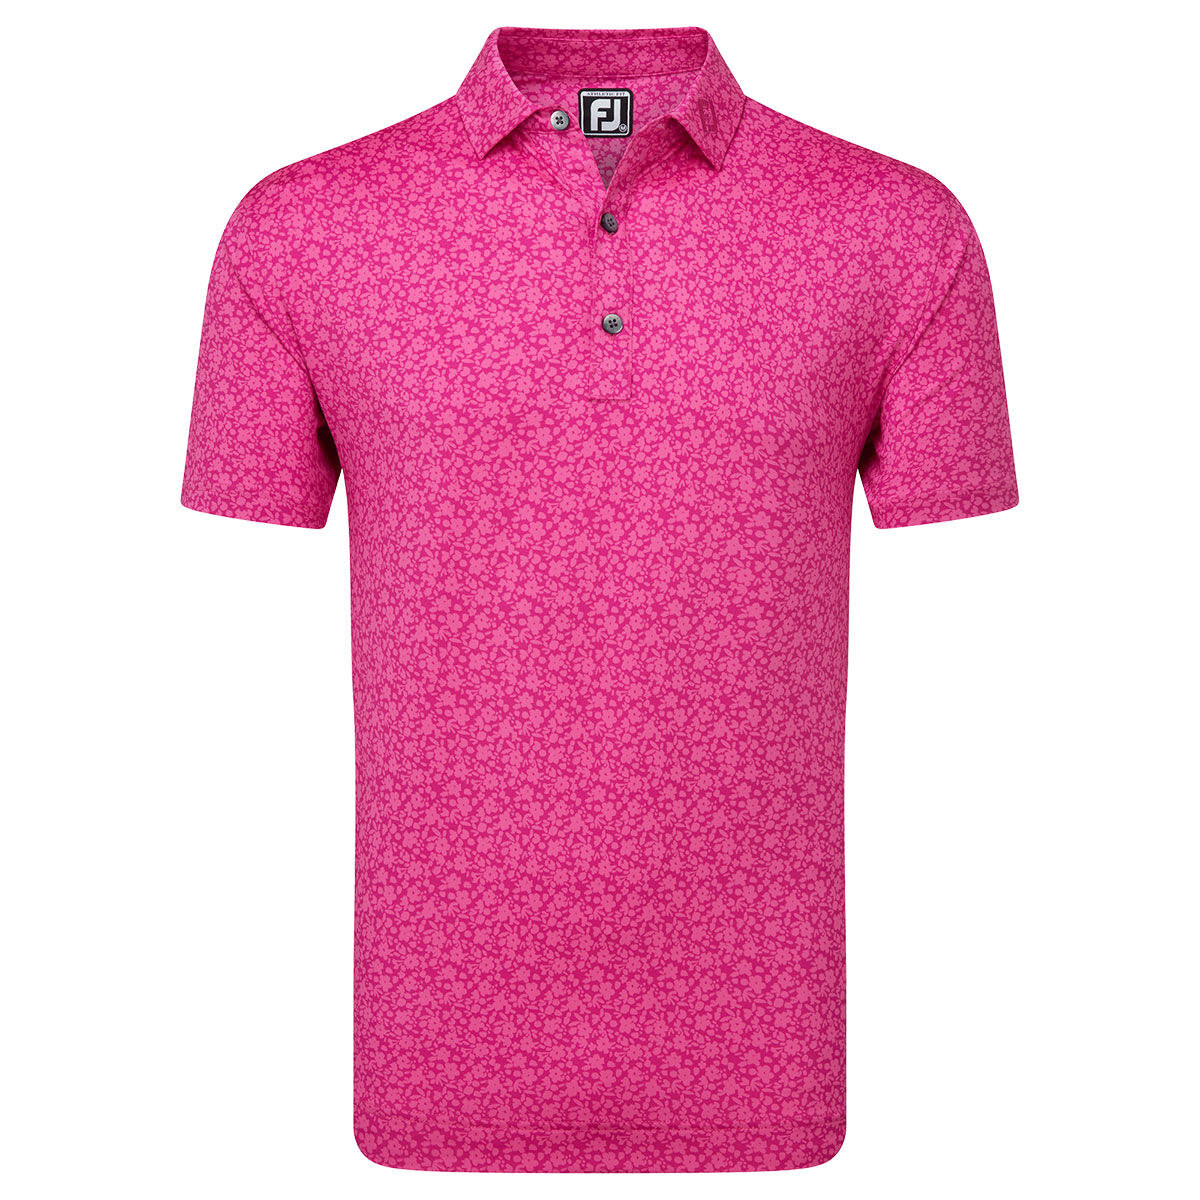 FootJoy Men's Painted Floral Golf Polo Shirt, Mens, Berry, Small | American Golf von FootJoy